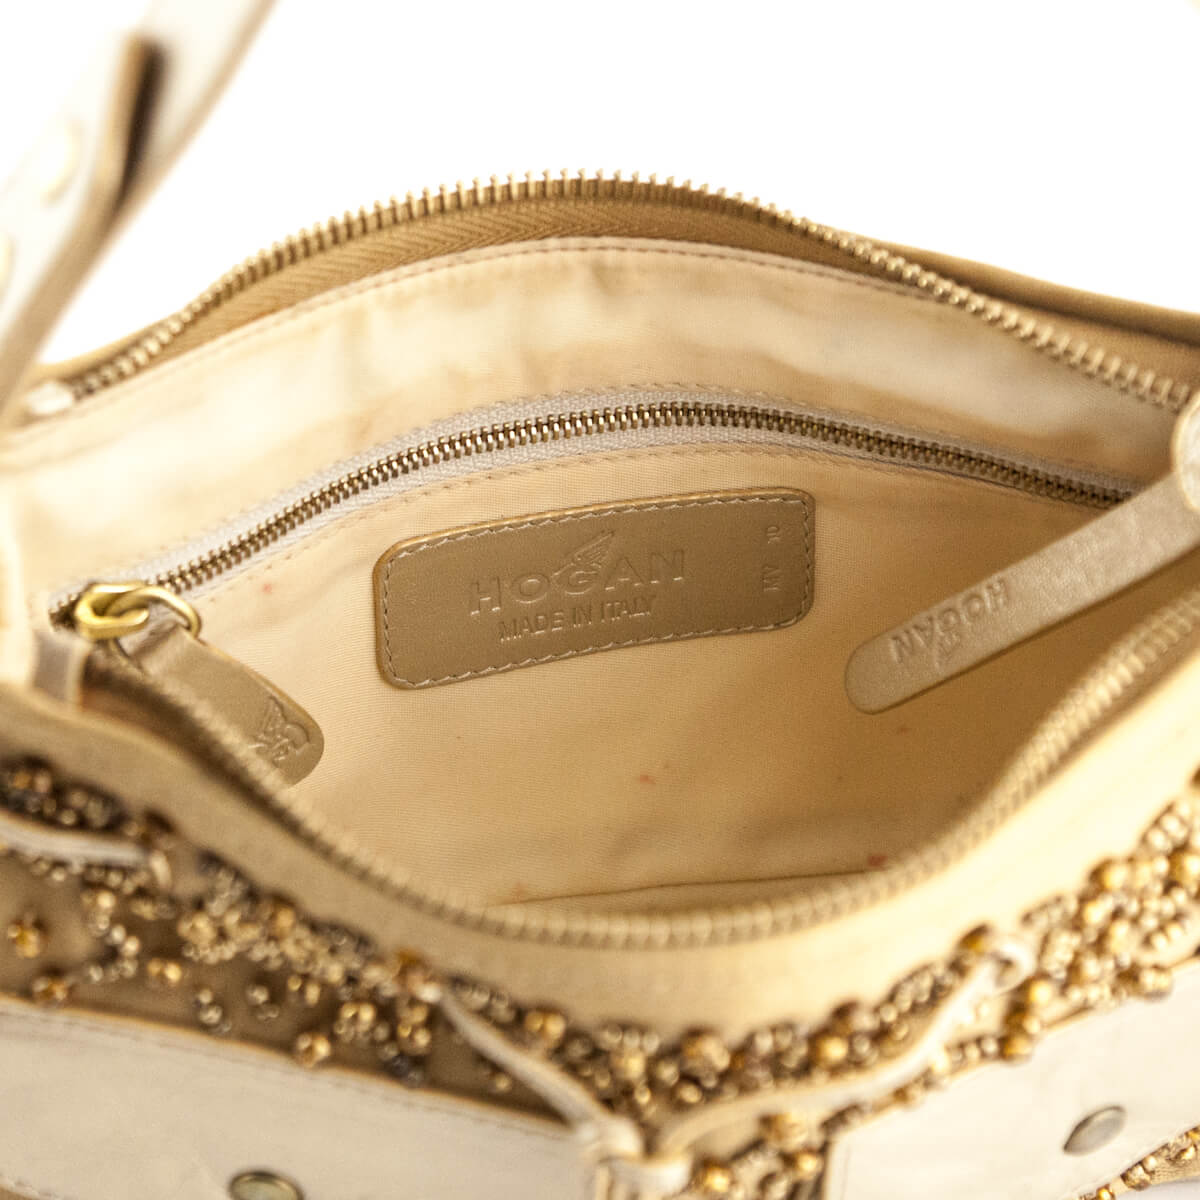 Hogan Gold Embellished Top Handle - Love that Bag etc - Preowned Authentic Designer Handbags & Preloved Fashions